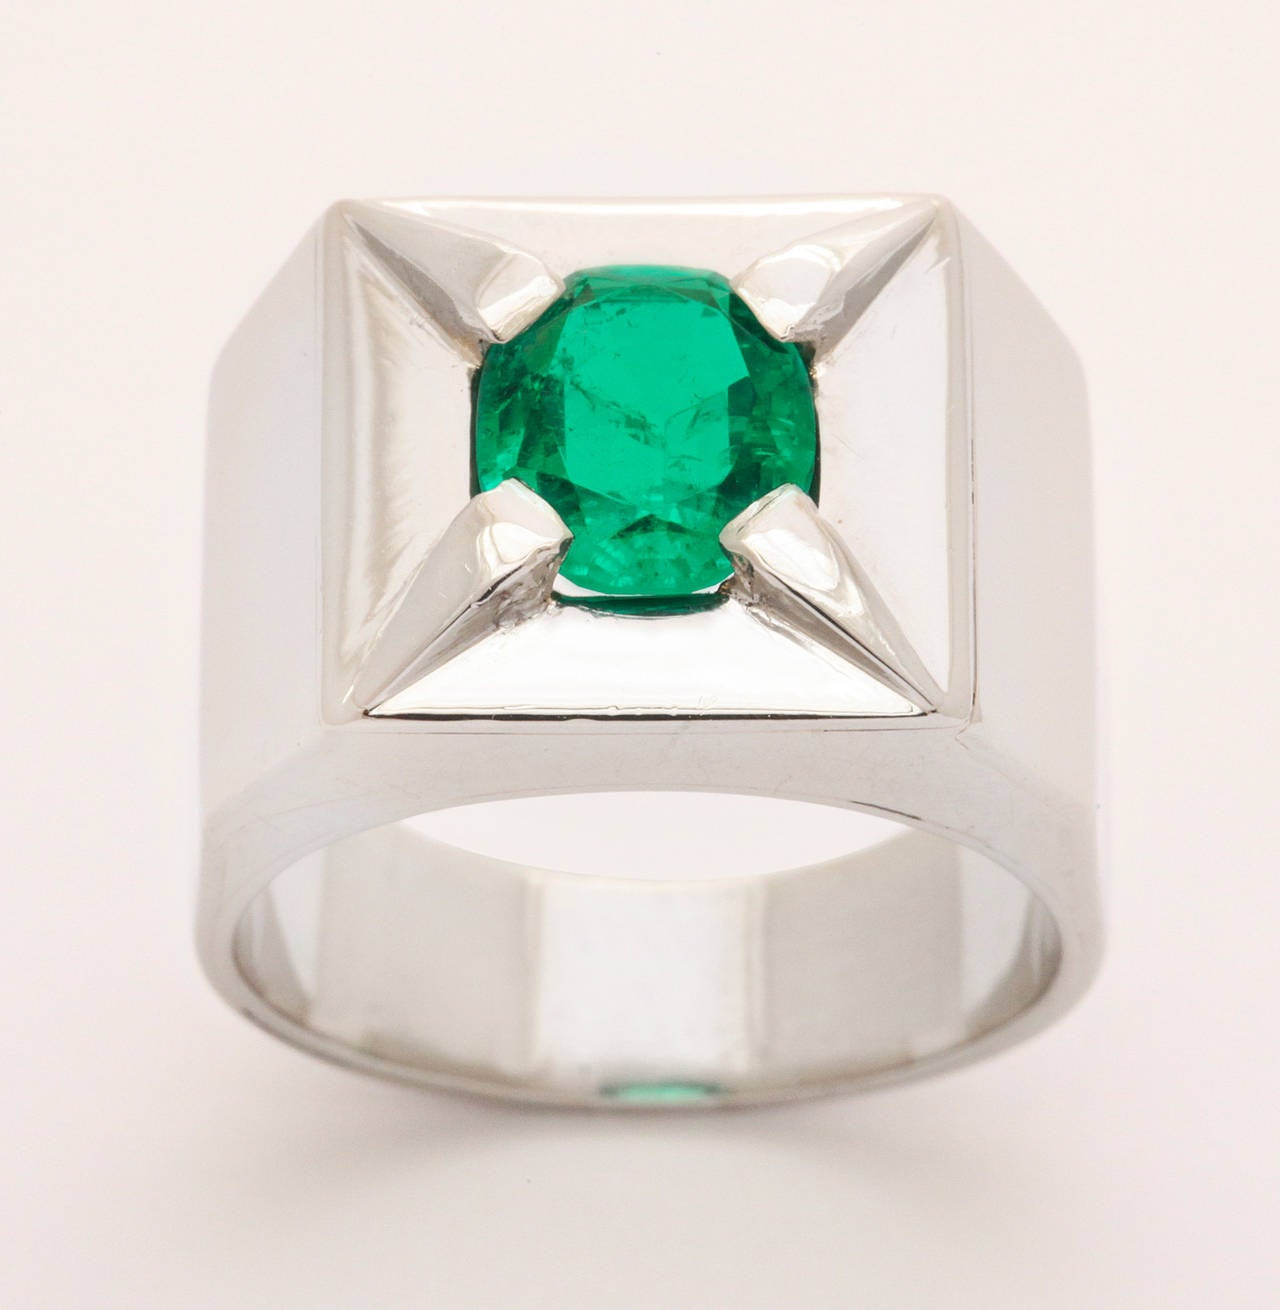 emerald ring in platinum by Suzanne Belperron, center emerald weighs 1.65 carats, circa 1940's.